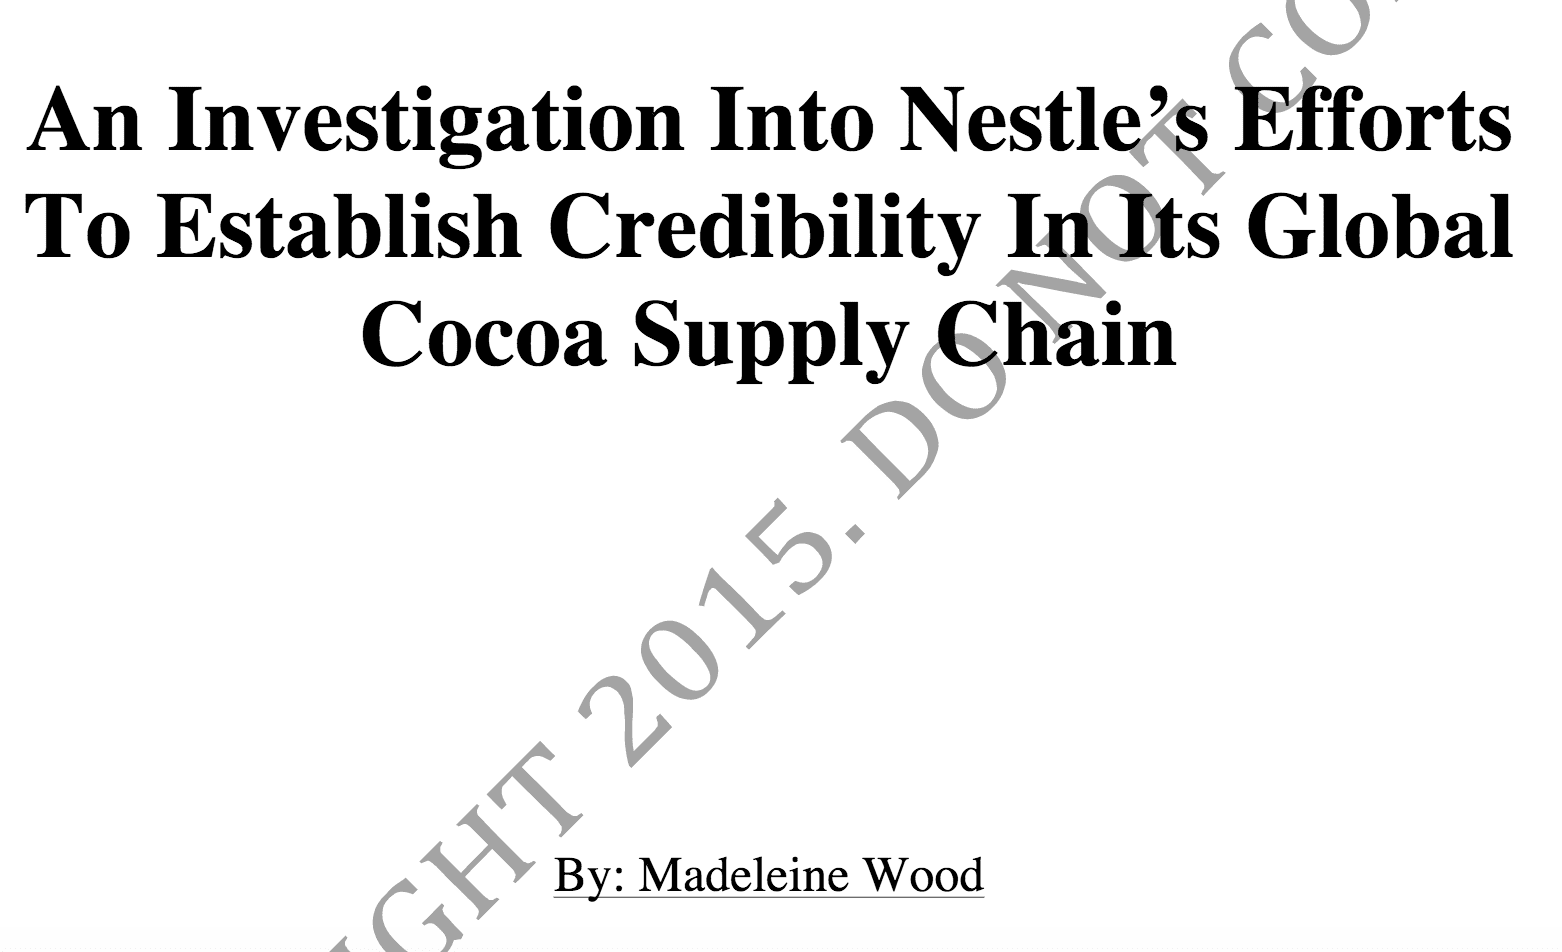 An investigation into Nestle’s efforts to establish credibiolity in its global cocoa supply chain